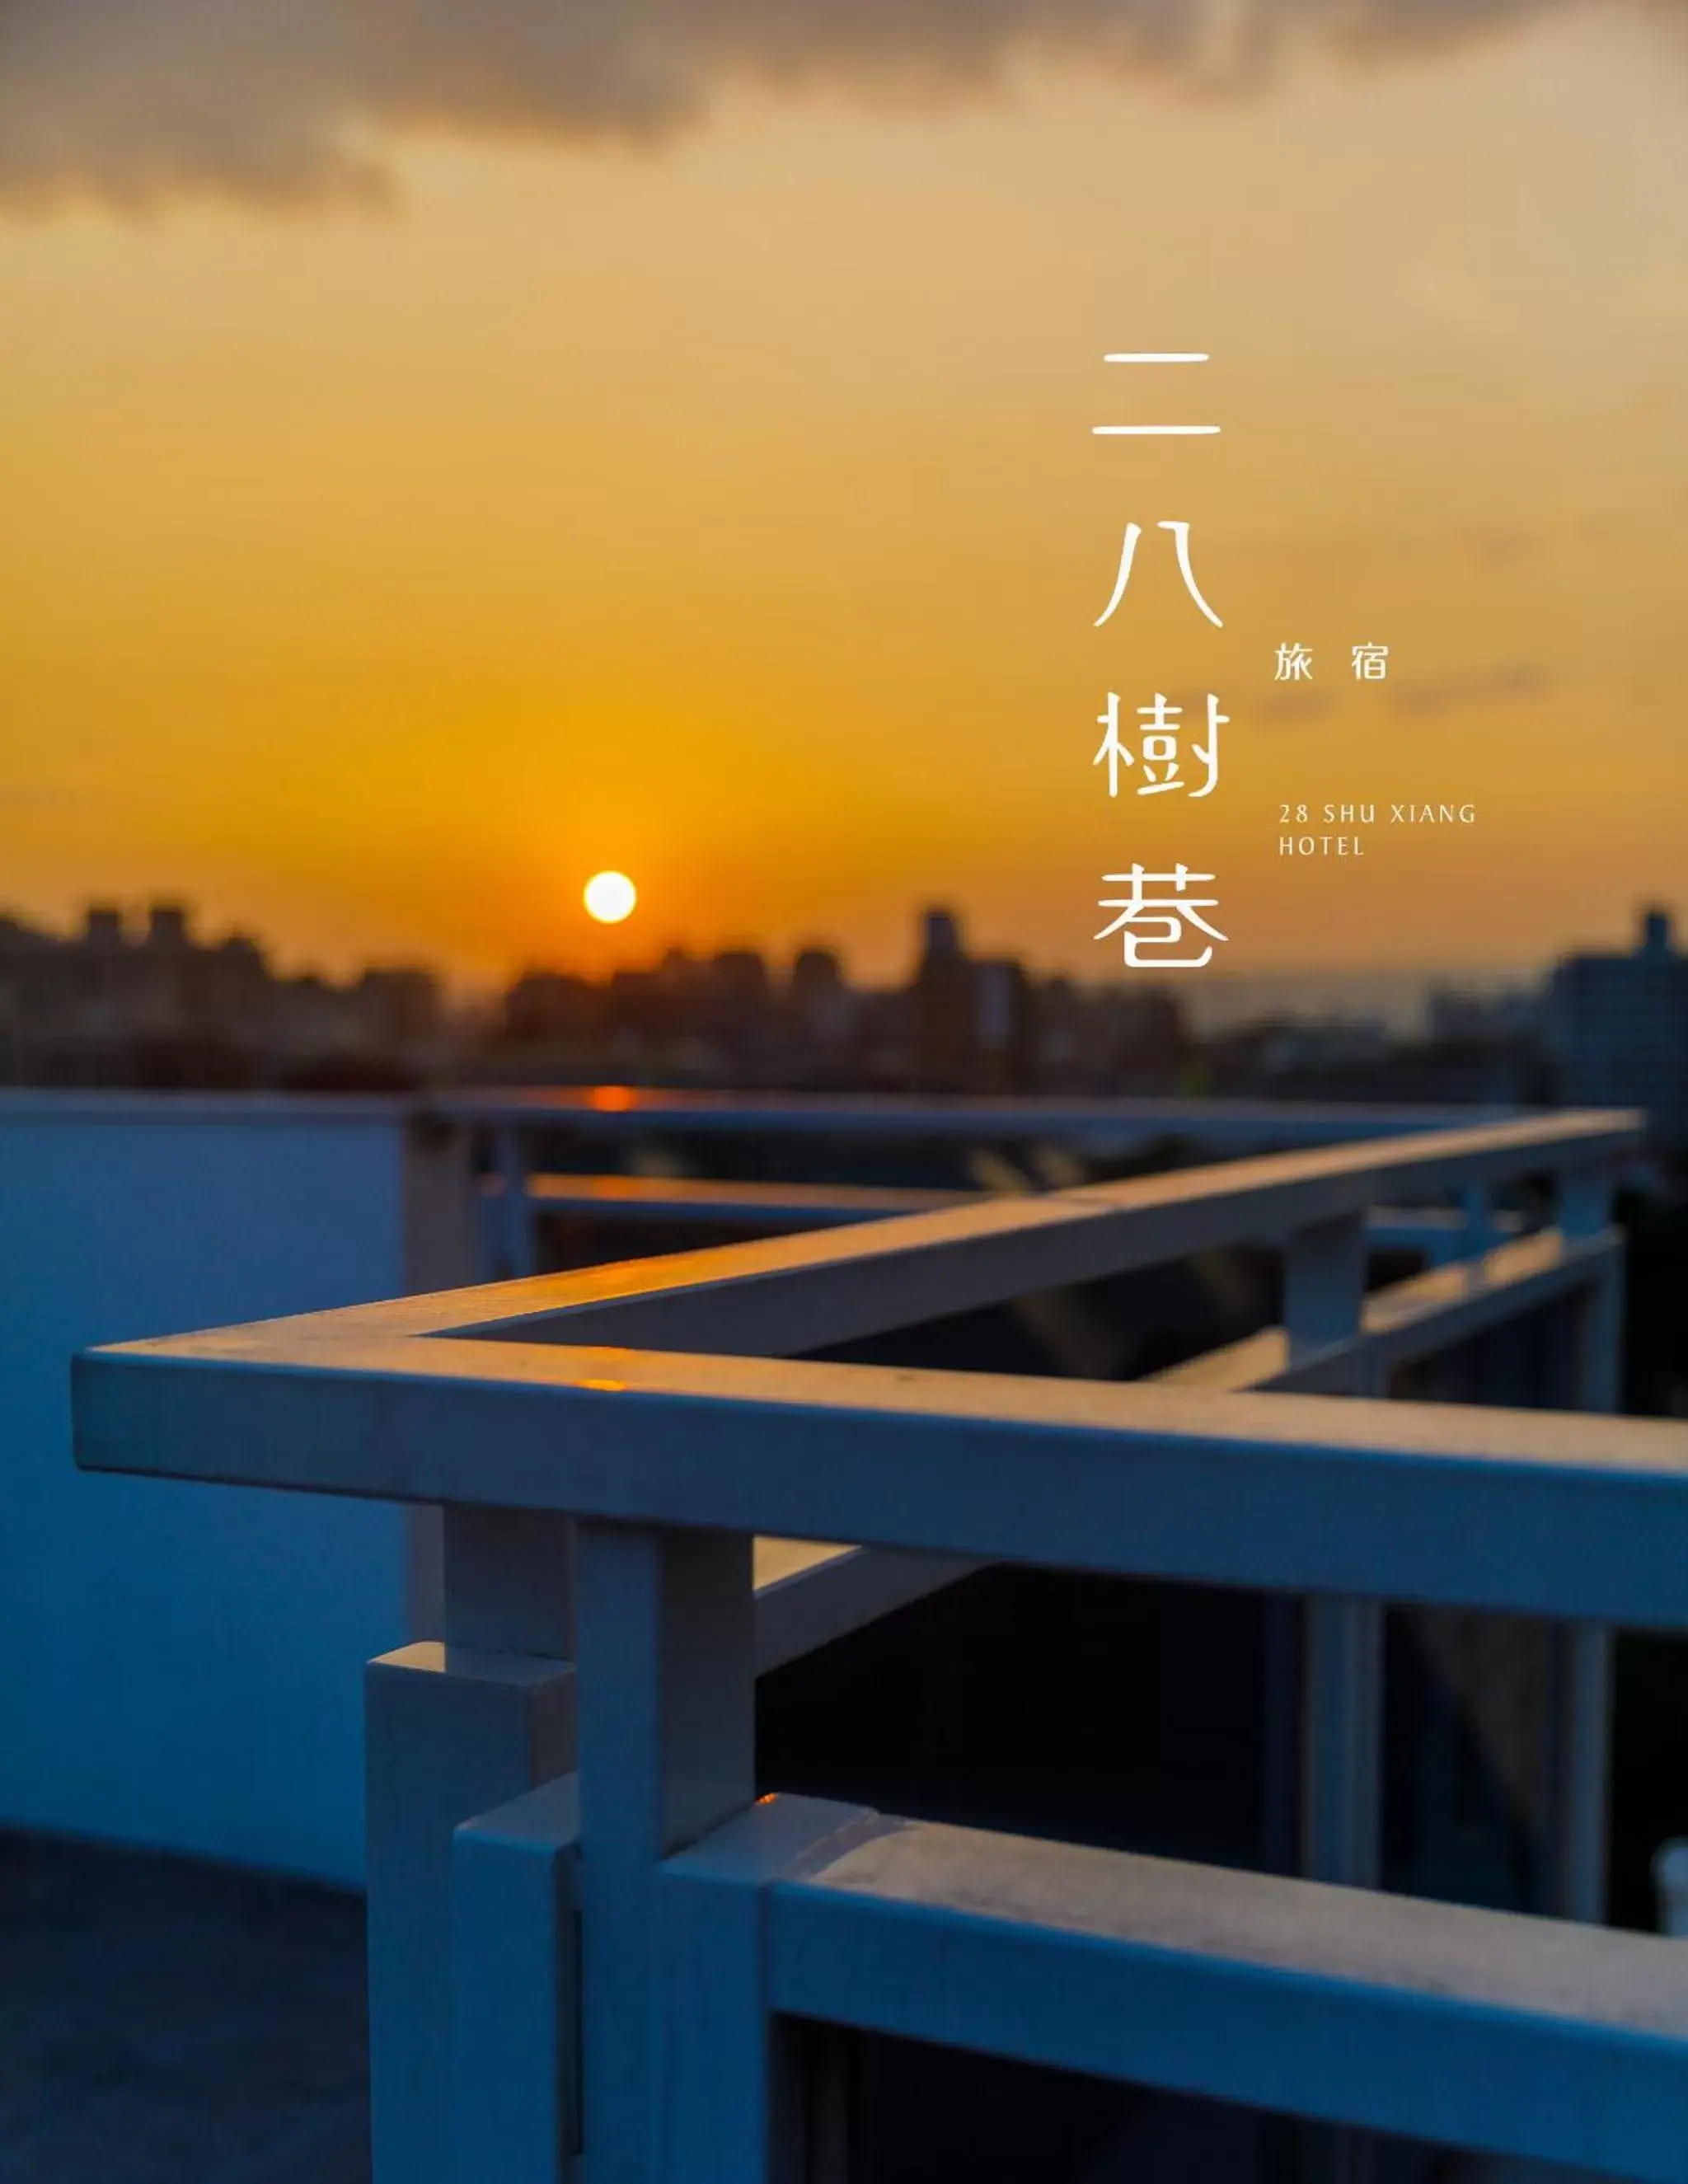 View (from property/room), Sunrise/Sunset in 28 Shu Xiang Hotel